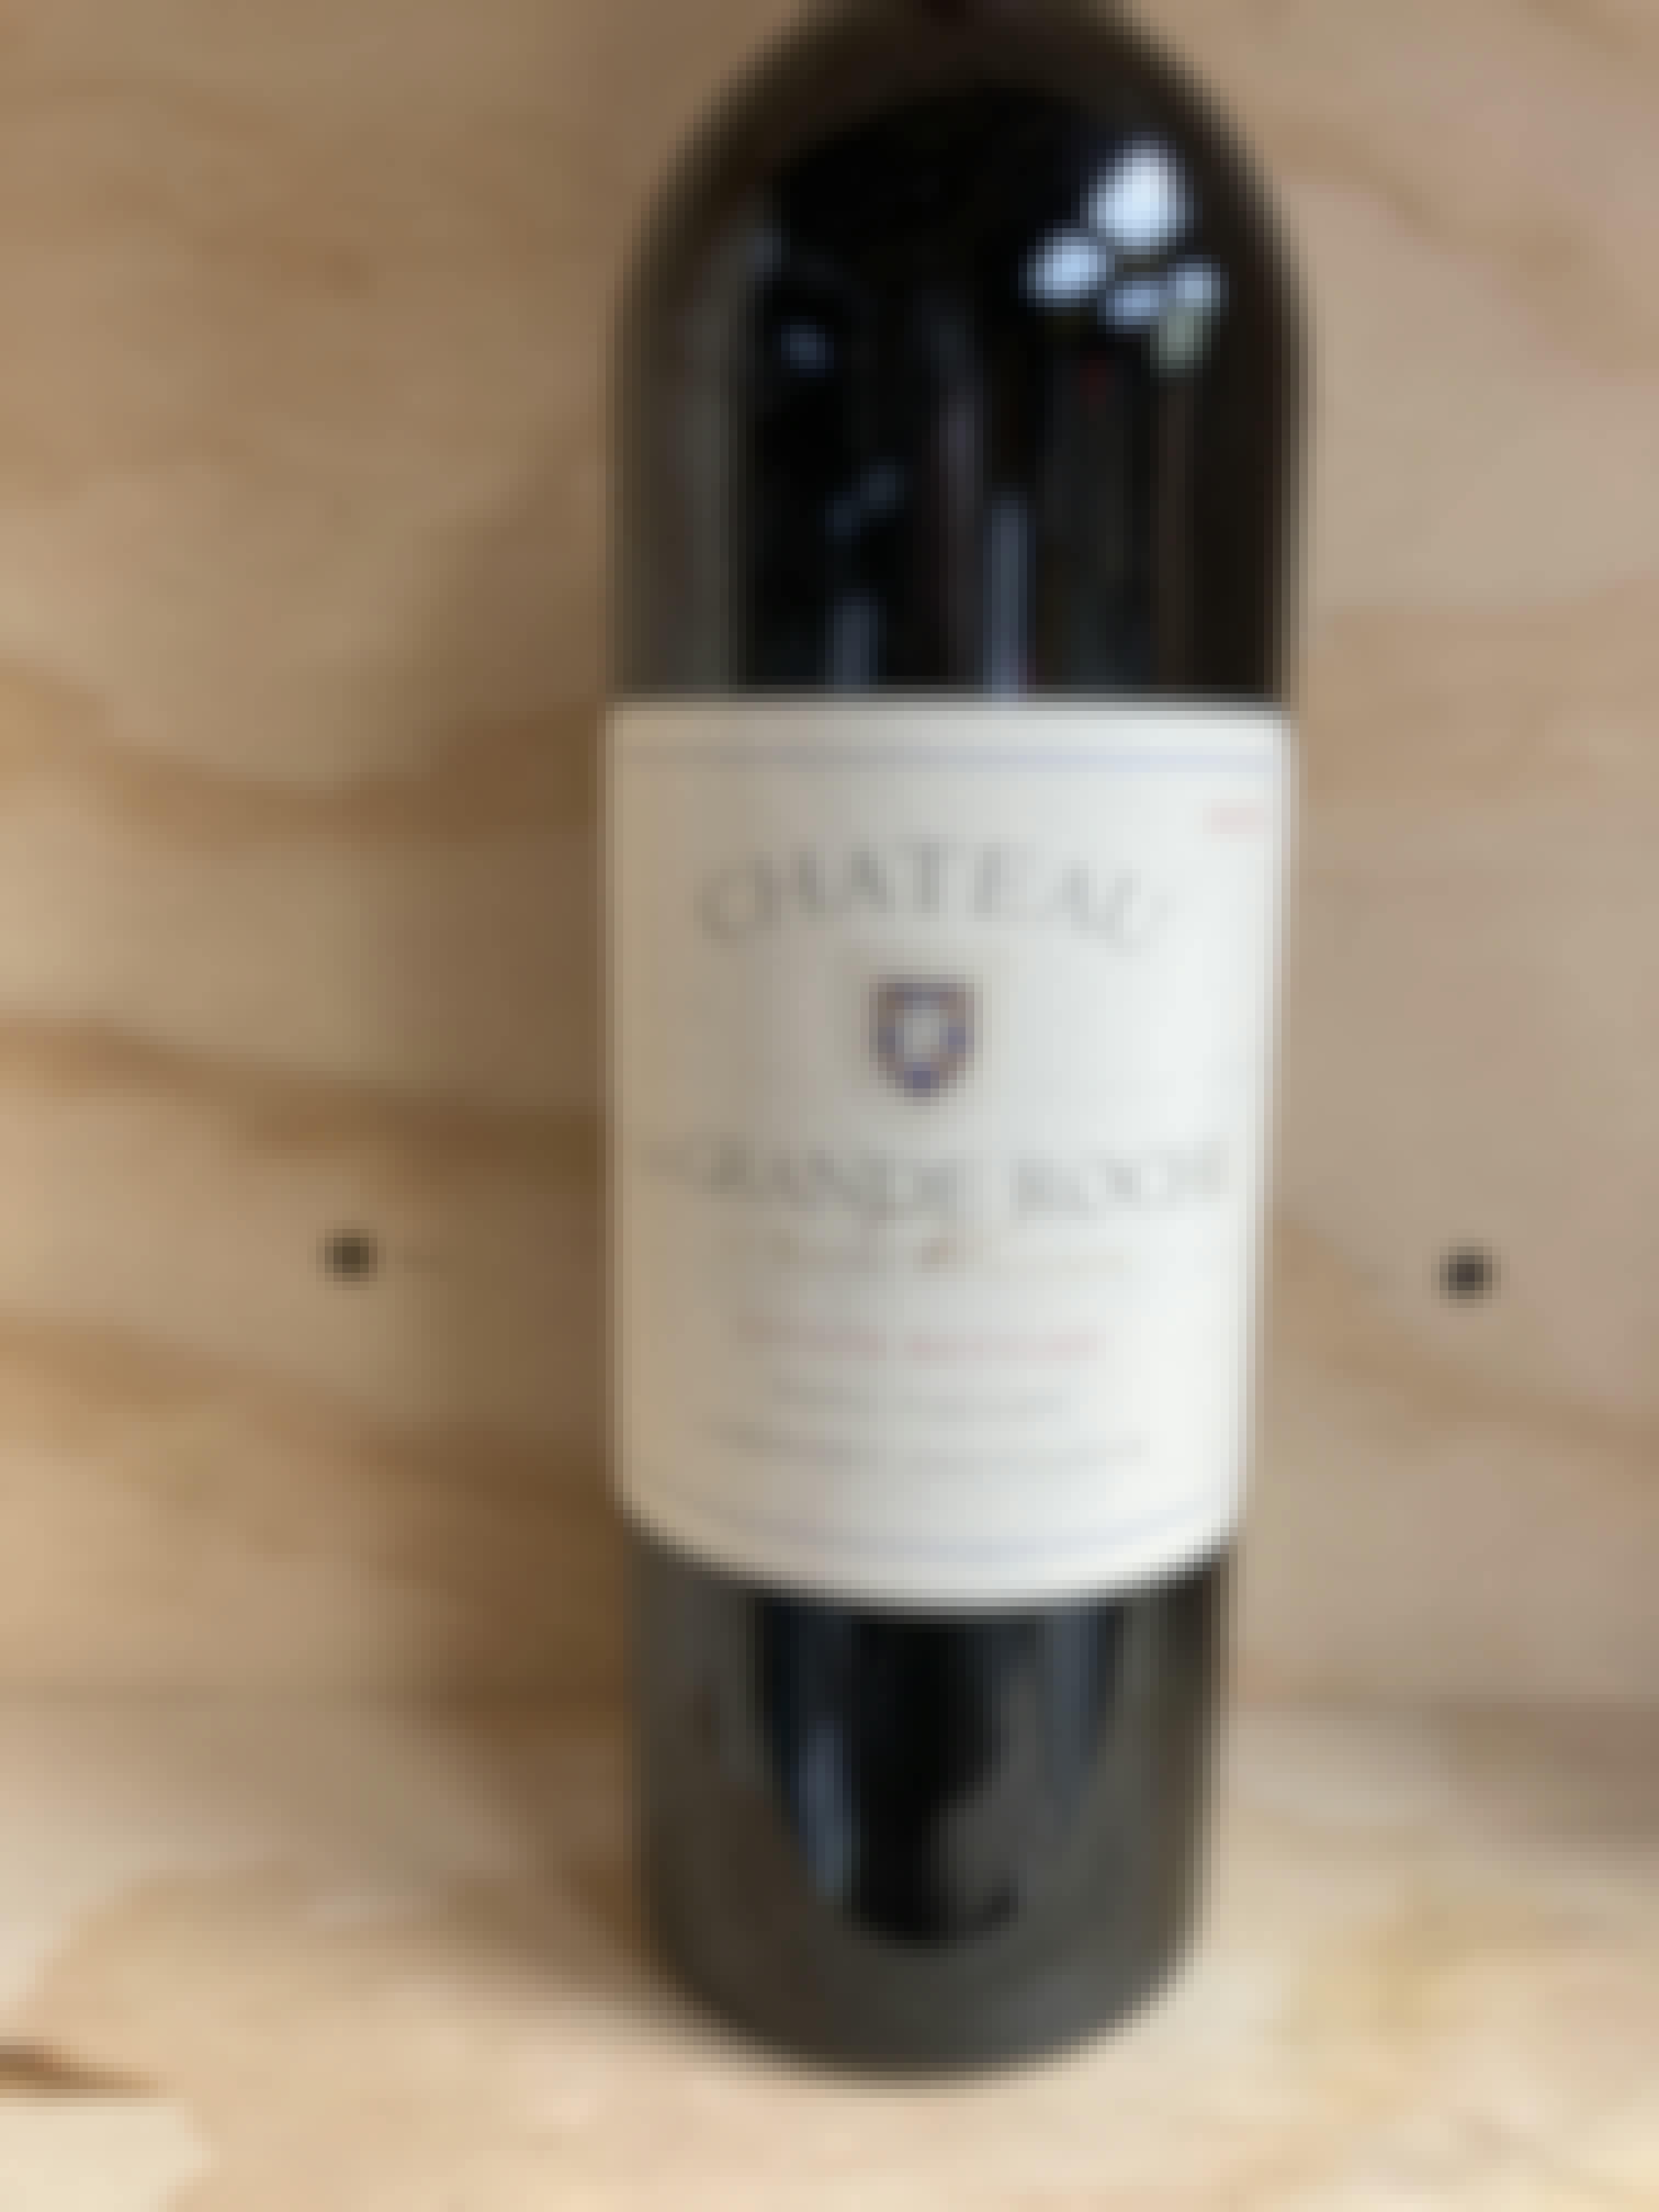 Enthusiast $25 Franey Wine $50 Wine - - France to Bordeaux Domaine - - -